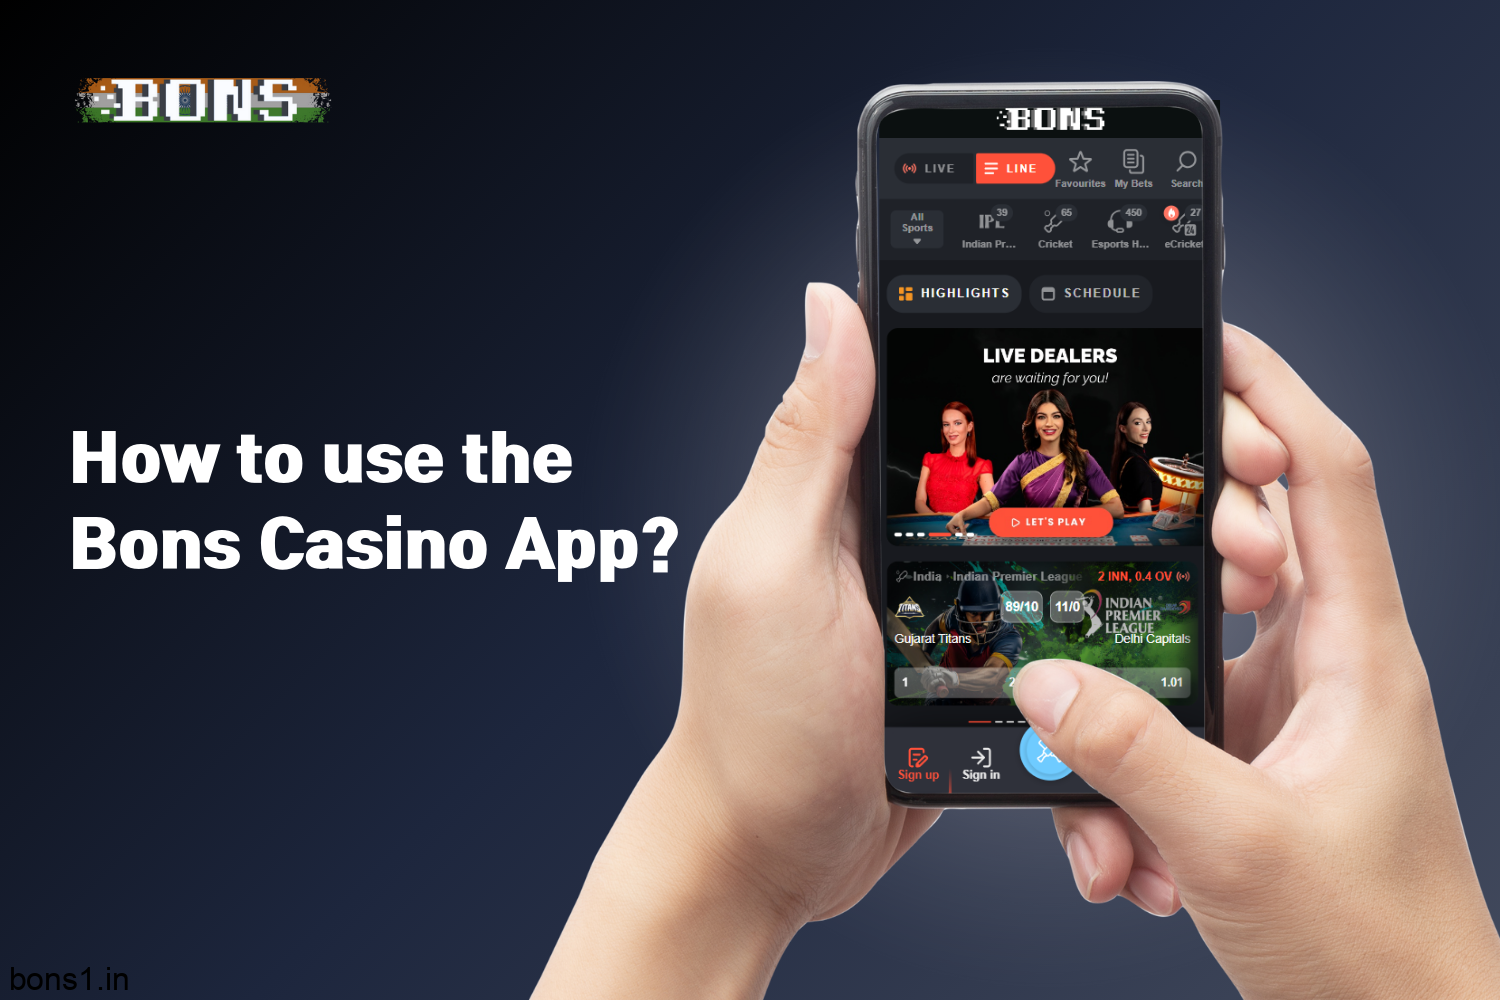 The Bons Casino app has a simple and user-friendly interface for easy use by users from India